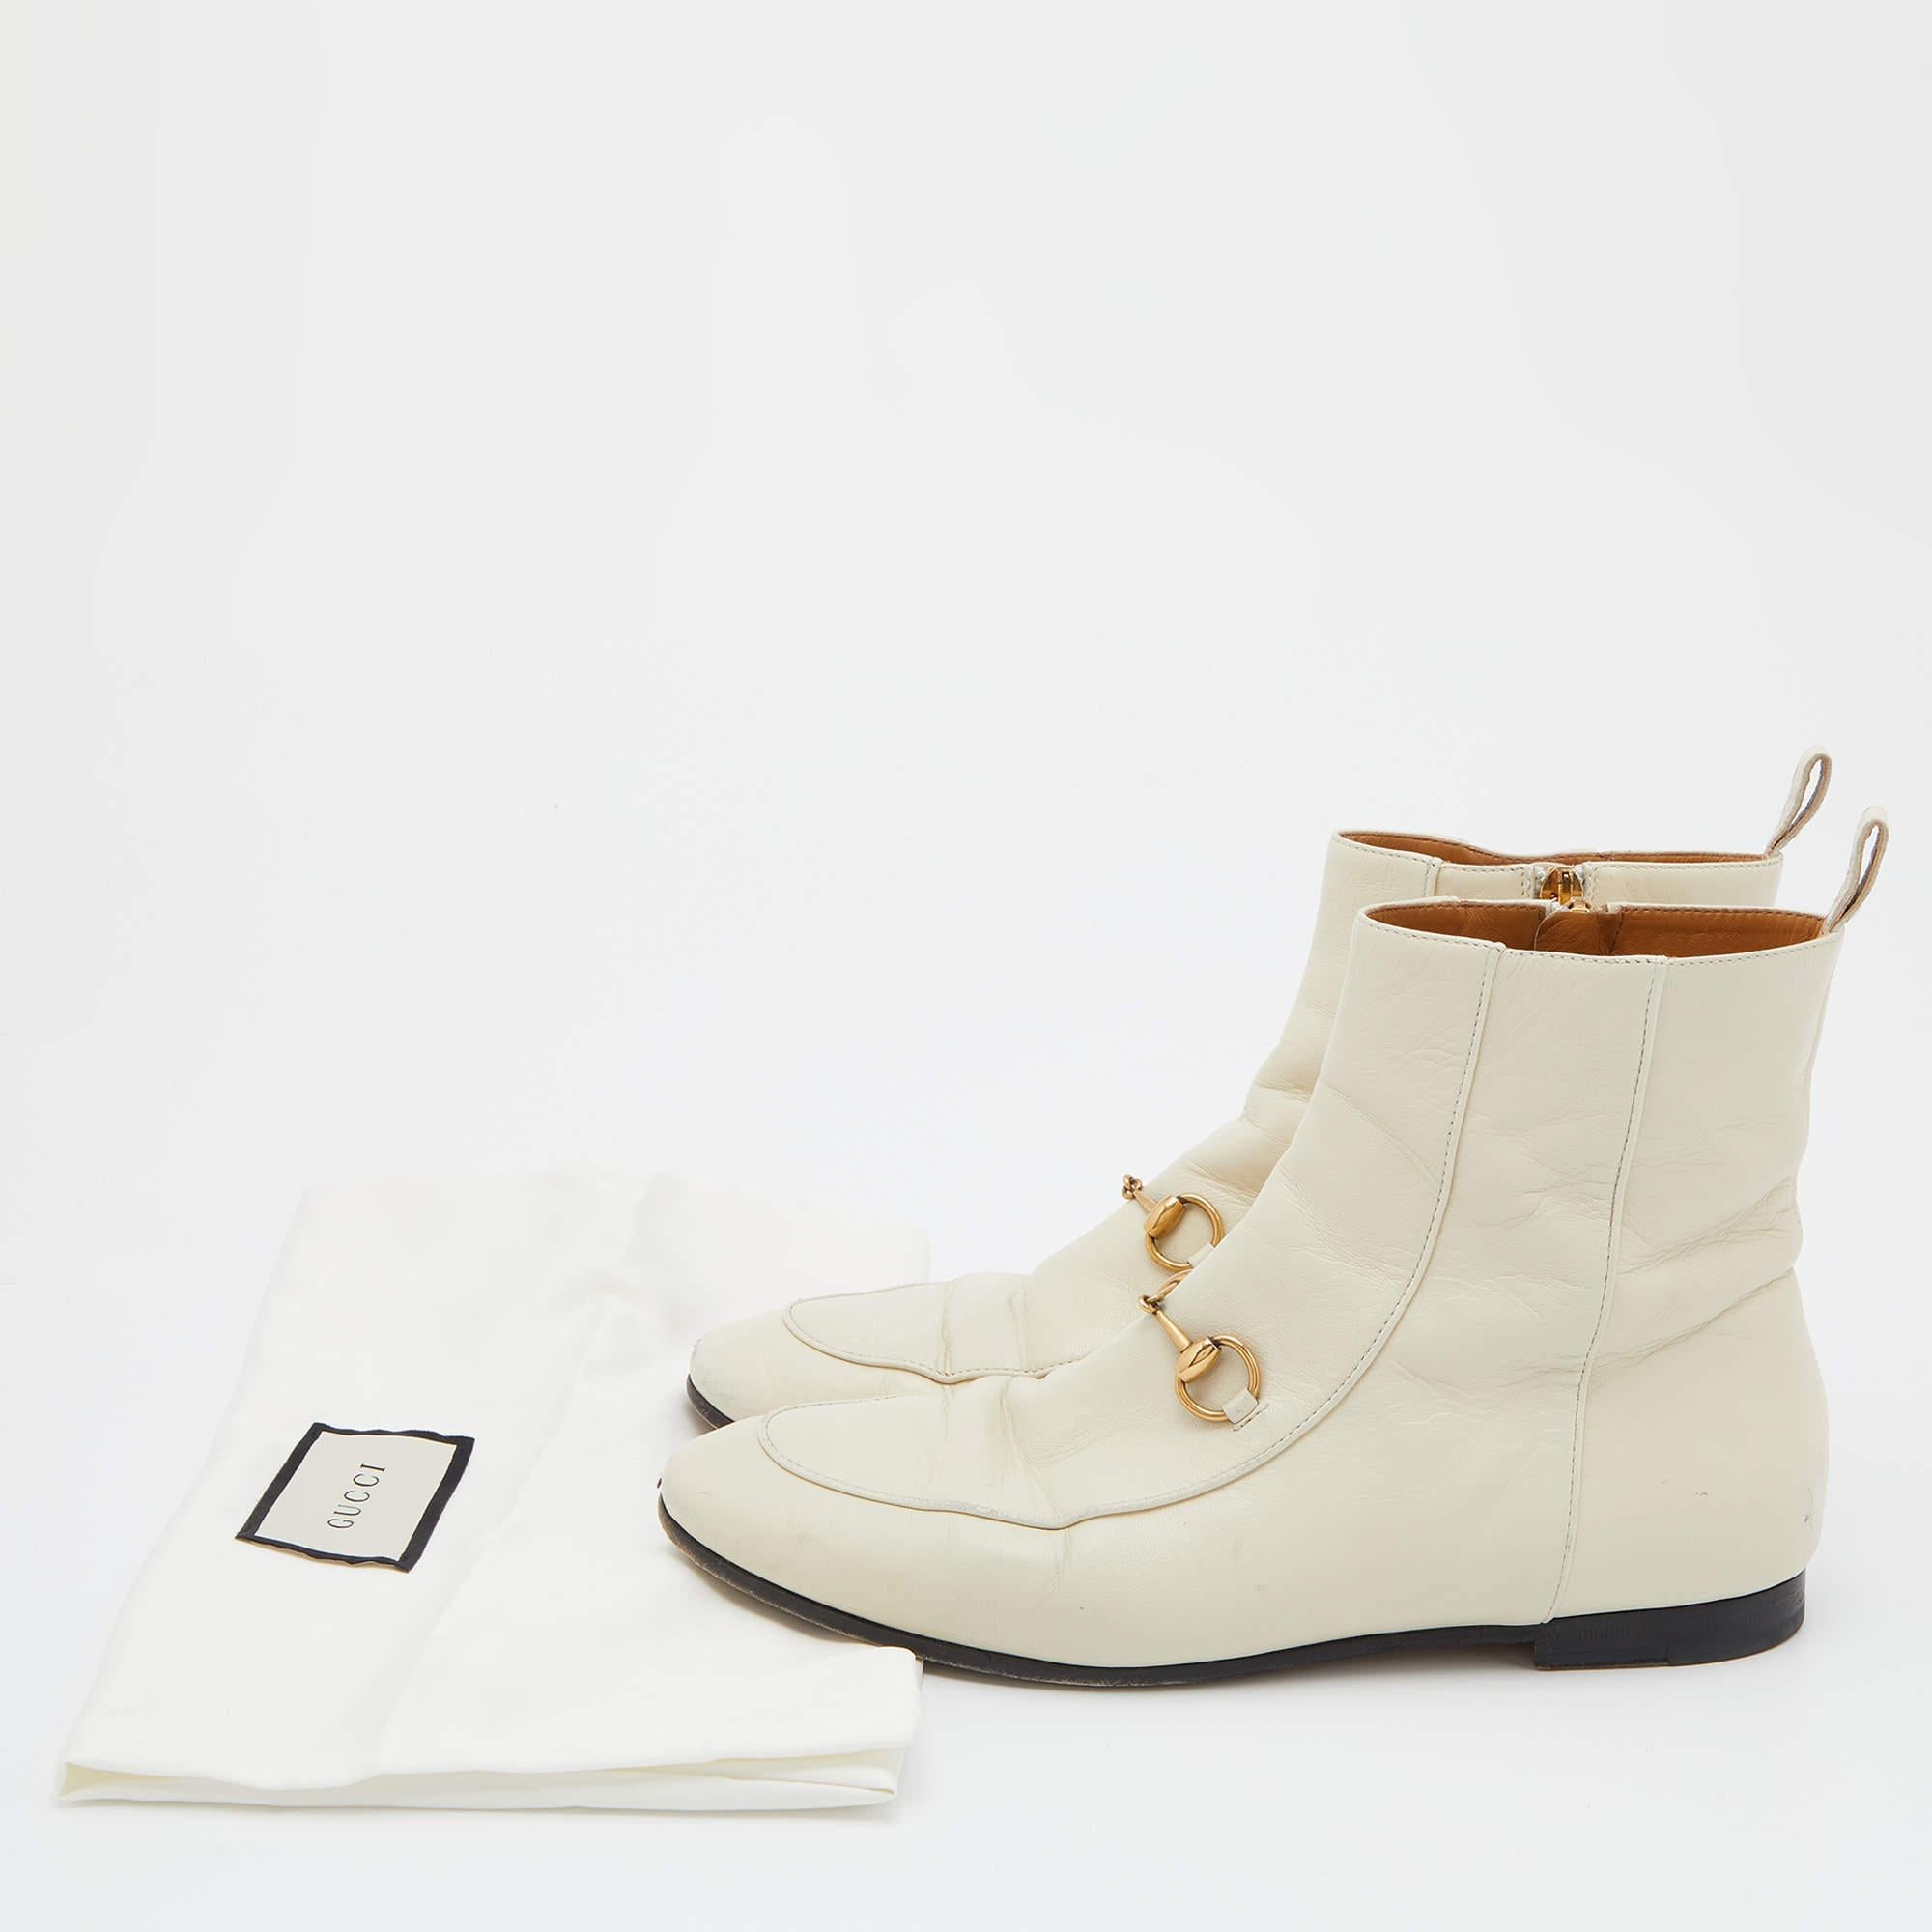 Gucci Cream Leather Horsebit Ankle Boots Size 38 For Sale 5